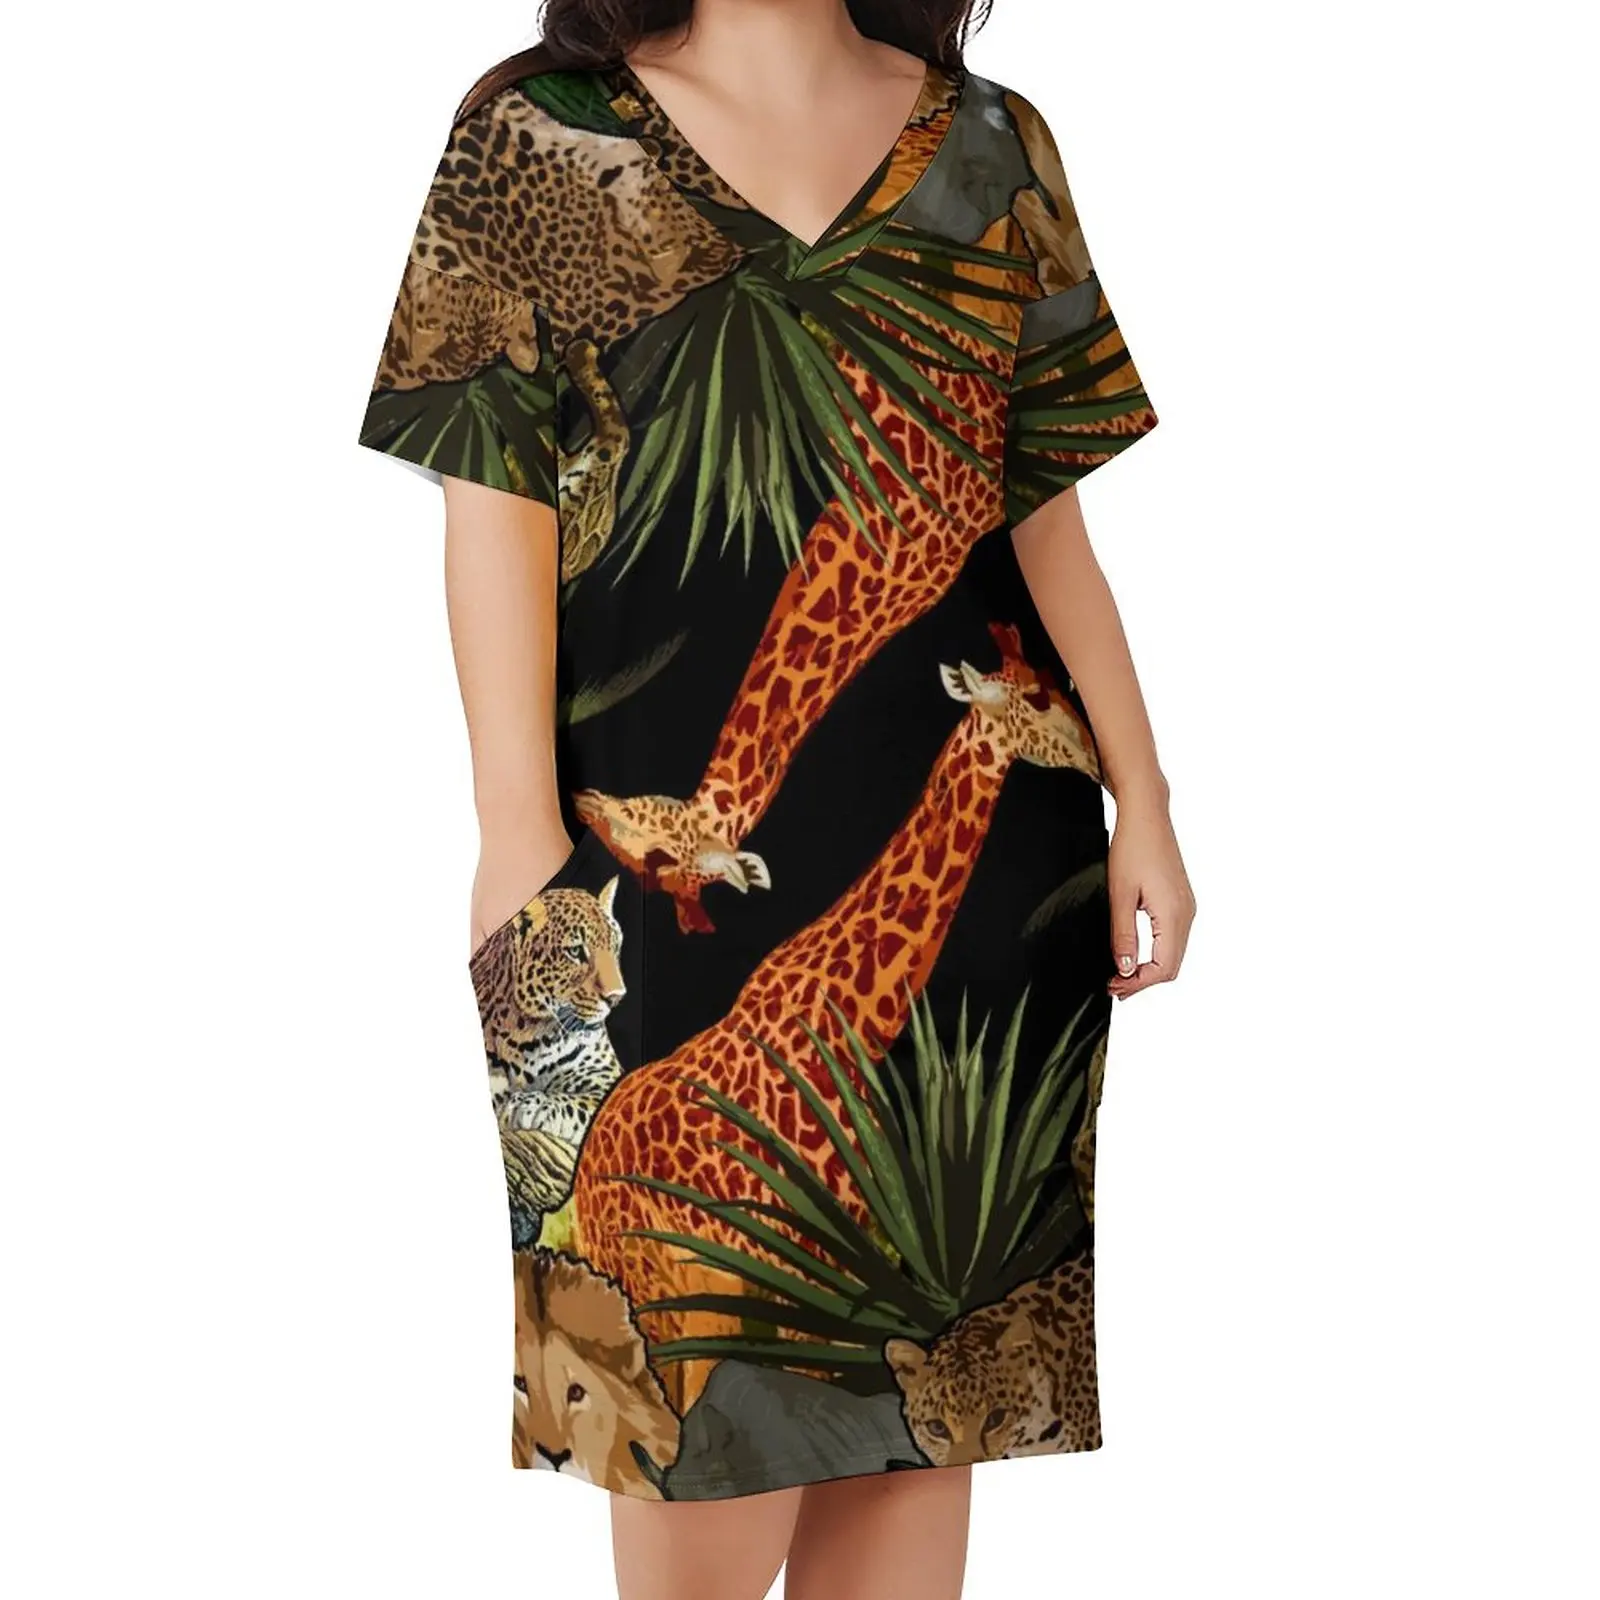 Giraffe And Leopard Dress V Neck African Wildlife Aesthetic Dresses Holiday Sexy Casual Dress Female Pattern Plus Size Clothes